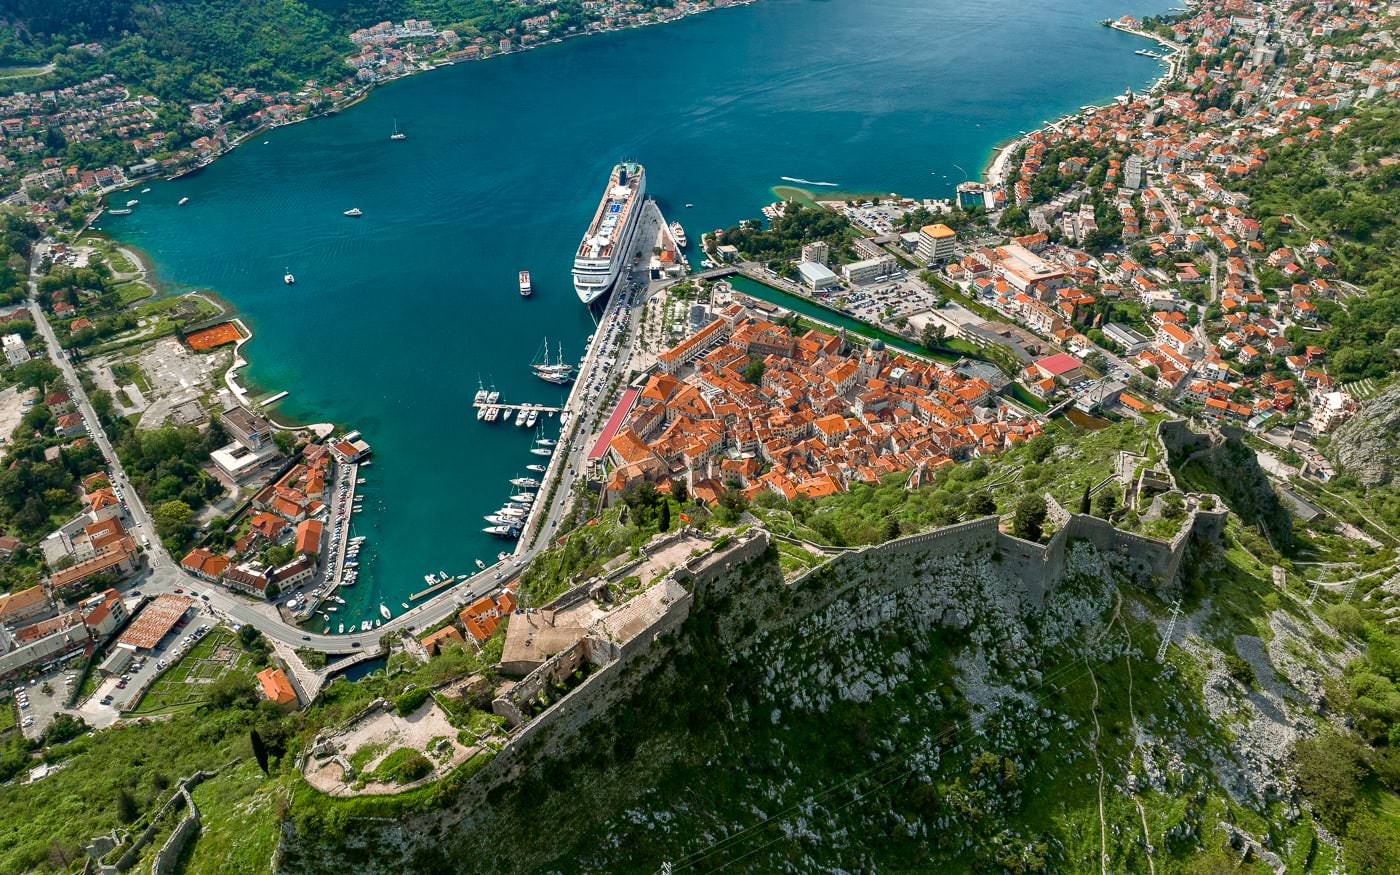 25 Awesome Things to do in Kotor, Montenegro